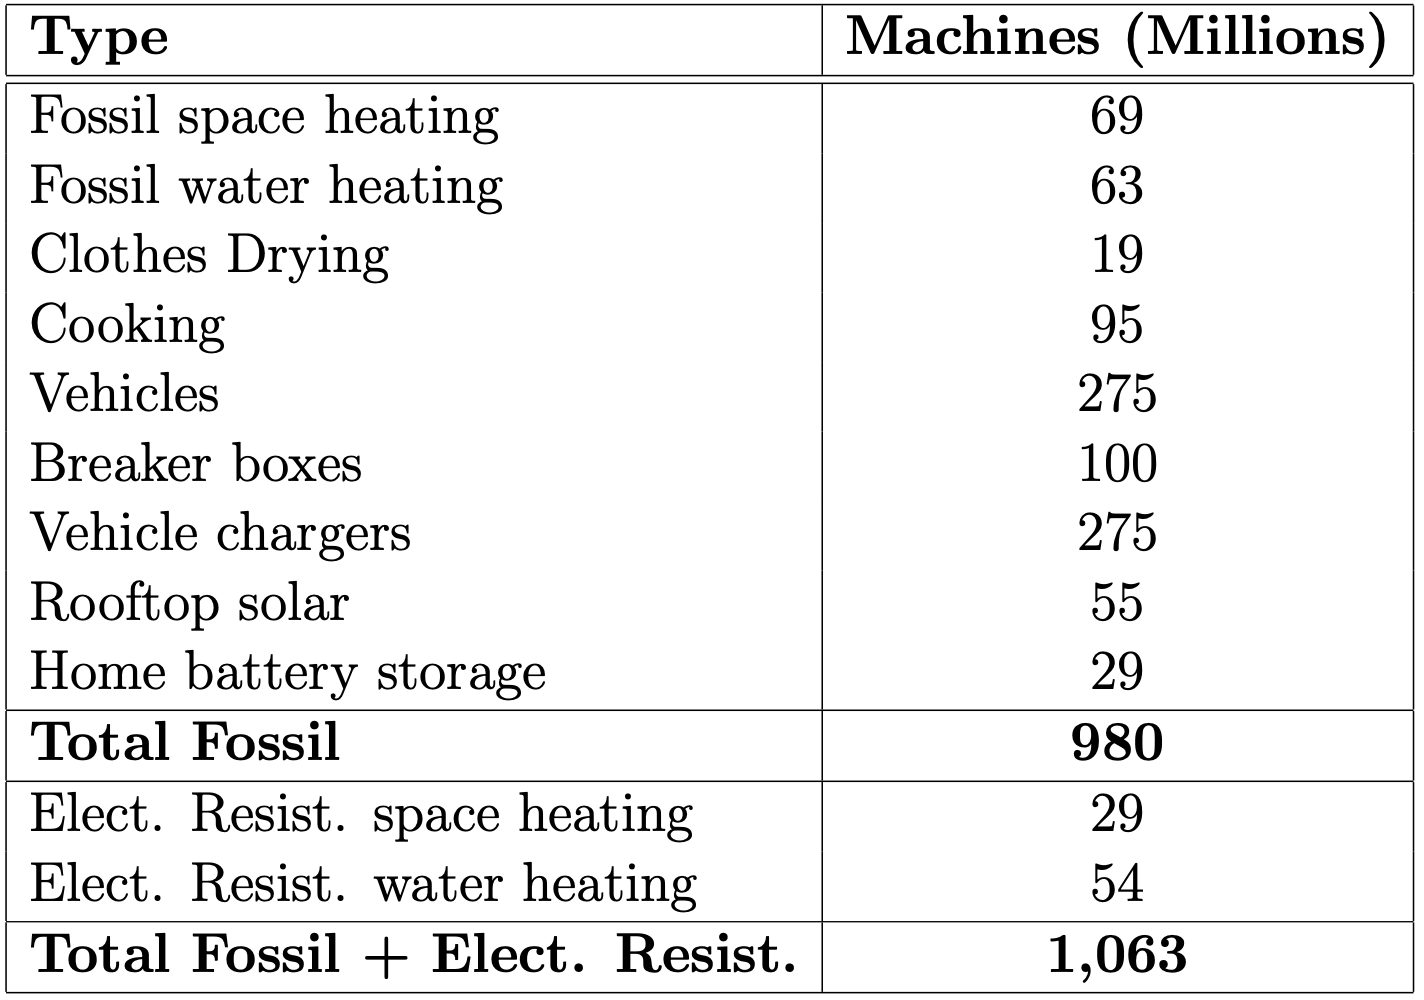 Table with a break down of the one billion machines that need to be electrified.  69M fossil space heating, 63M fossil water heating, 19M clothes drying, 95M cooking, 275M vehicles, 100M breaker boxes, 275M vehicle chargers, 55M rooftop solar, 29M home battery storage, 29M electrical resistance space heating, 54M electrical resistant water heating.